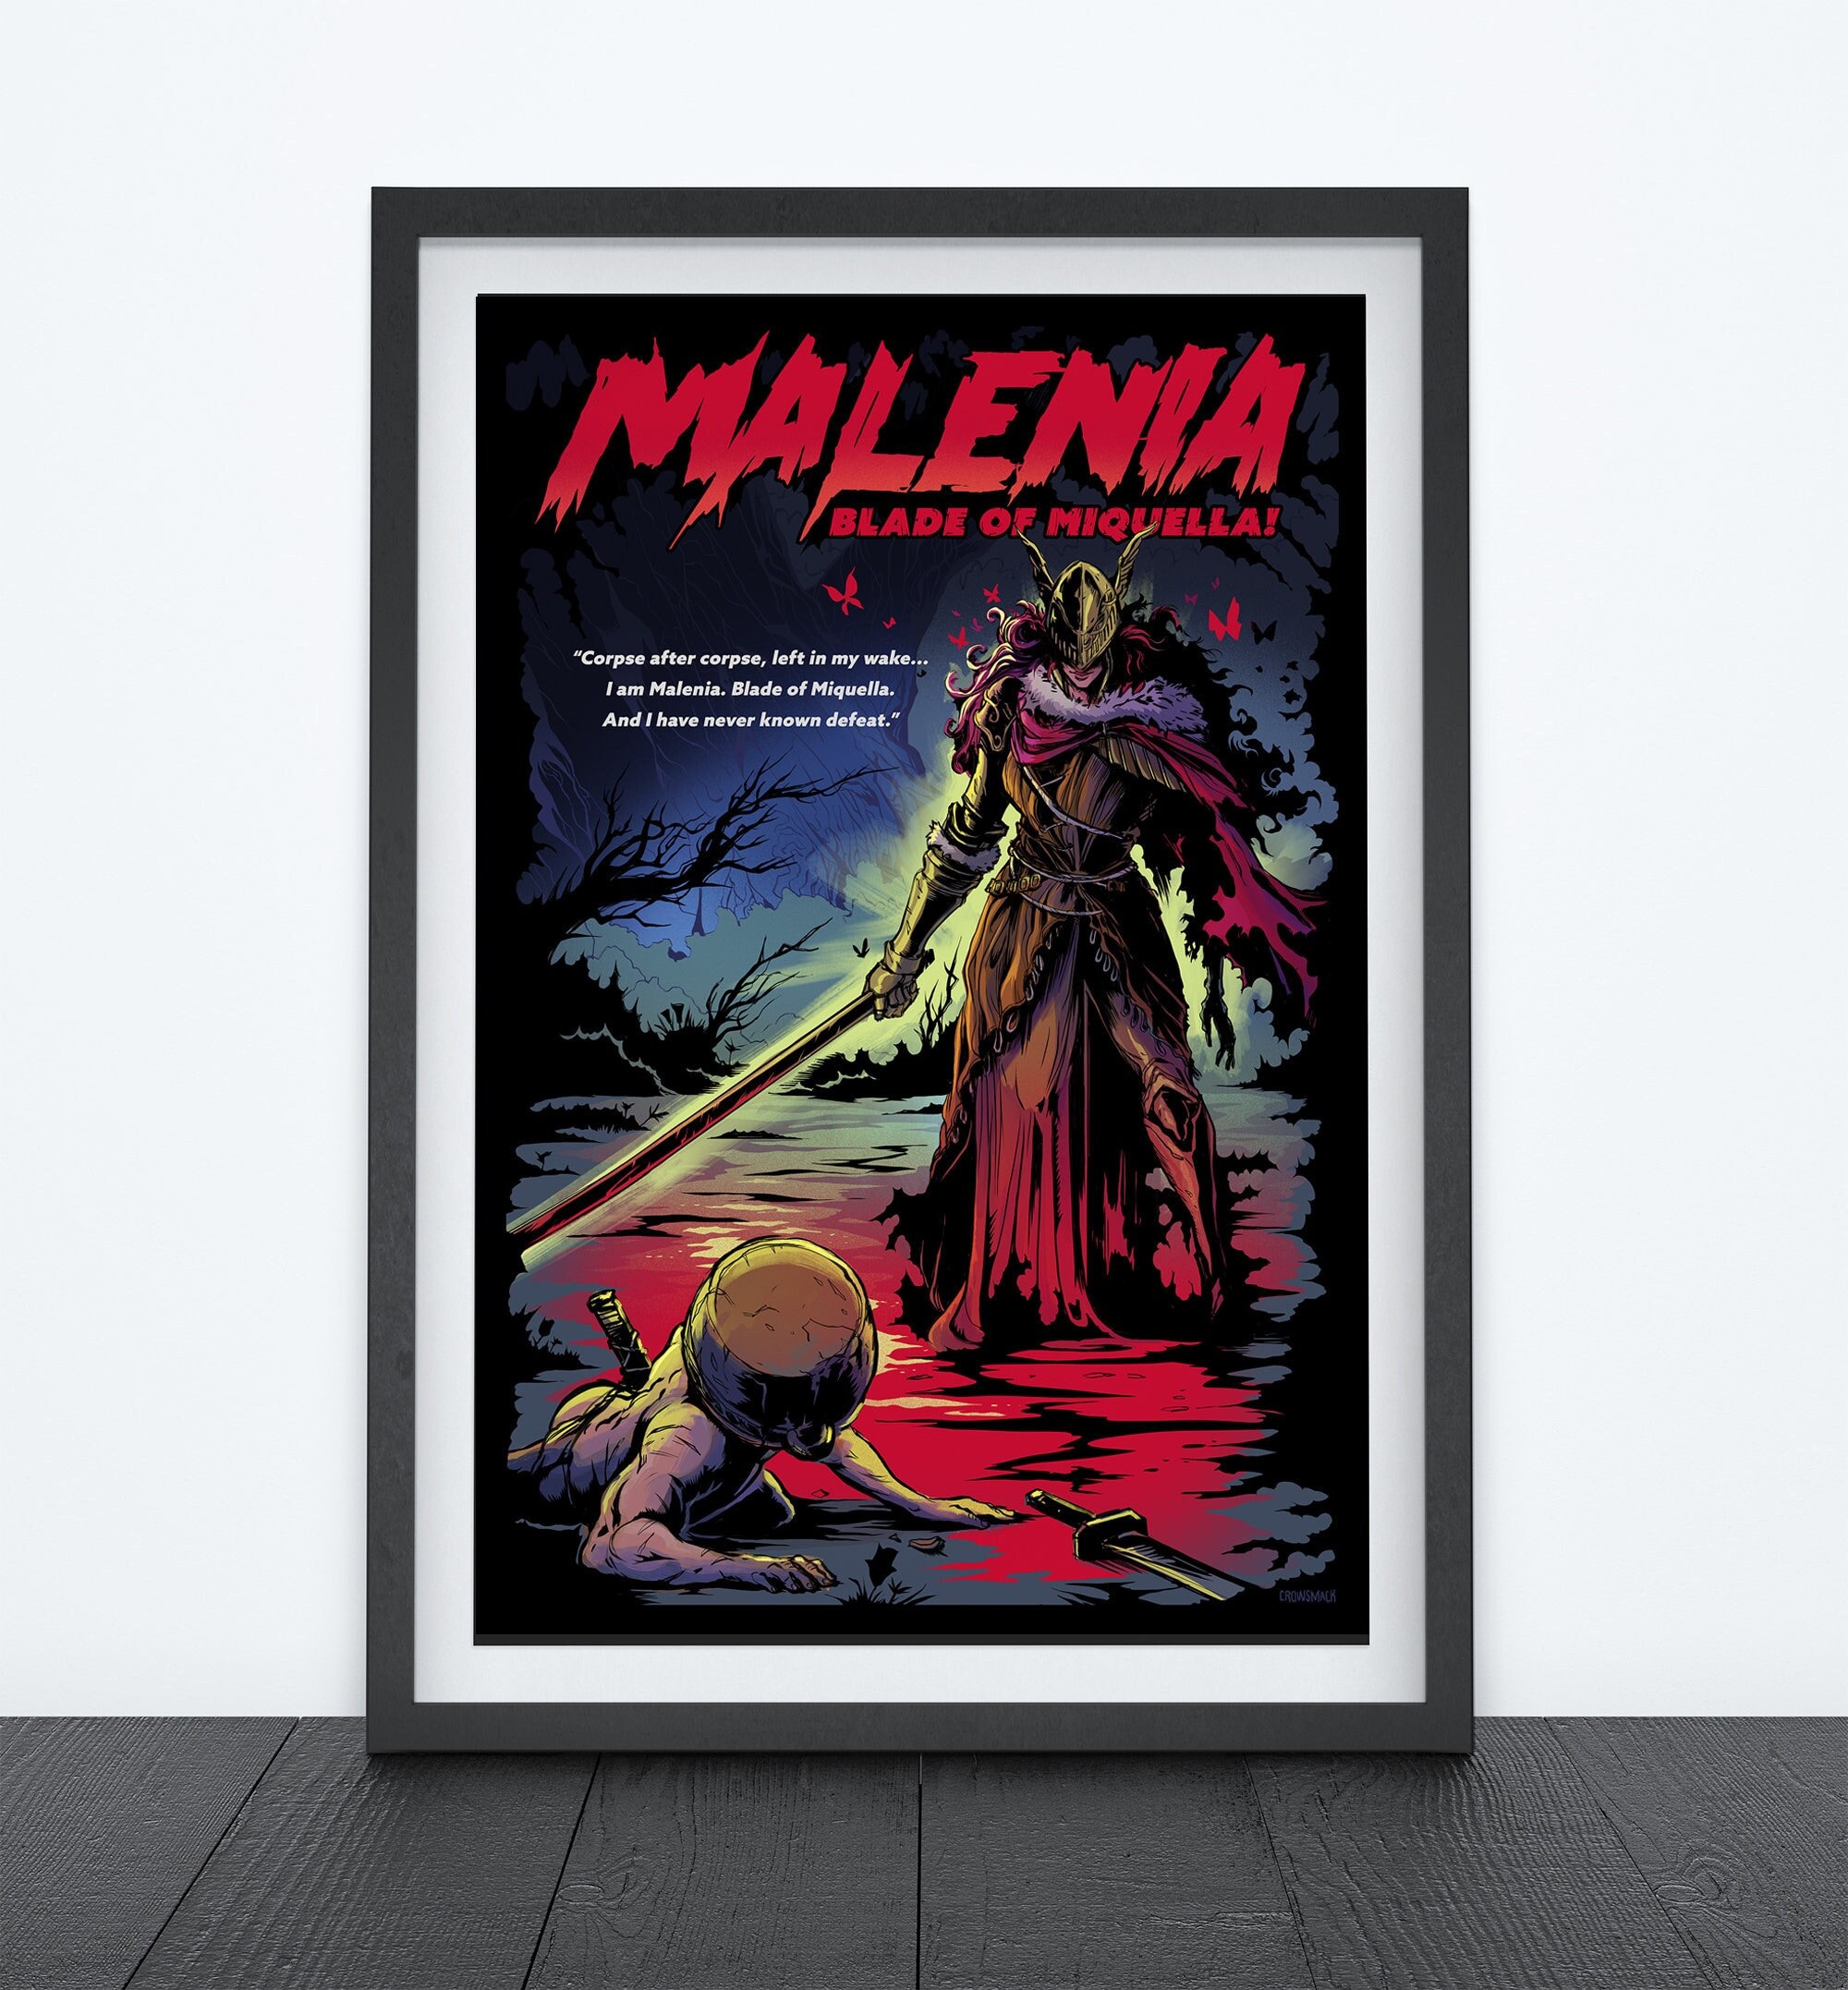 THE ART OF VIDEO GAMES on X: Elden Ring - Malenia, Blade of Miquella   / X